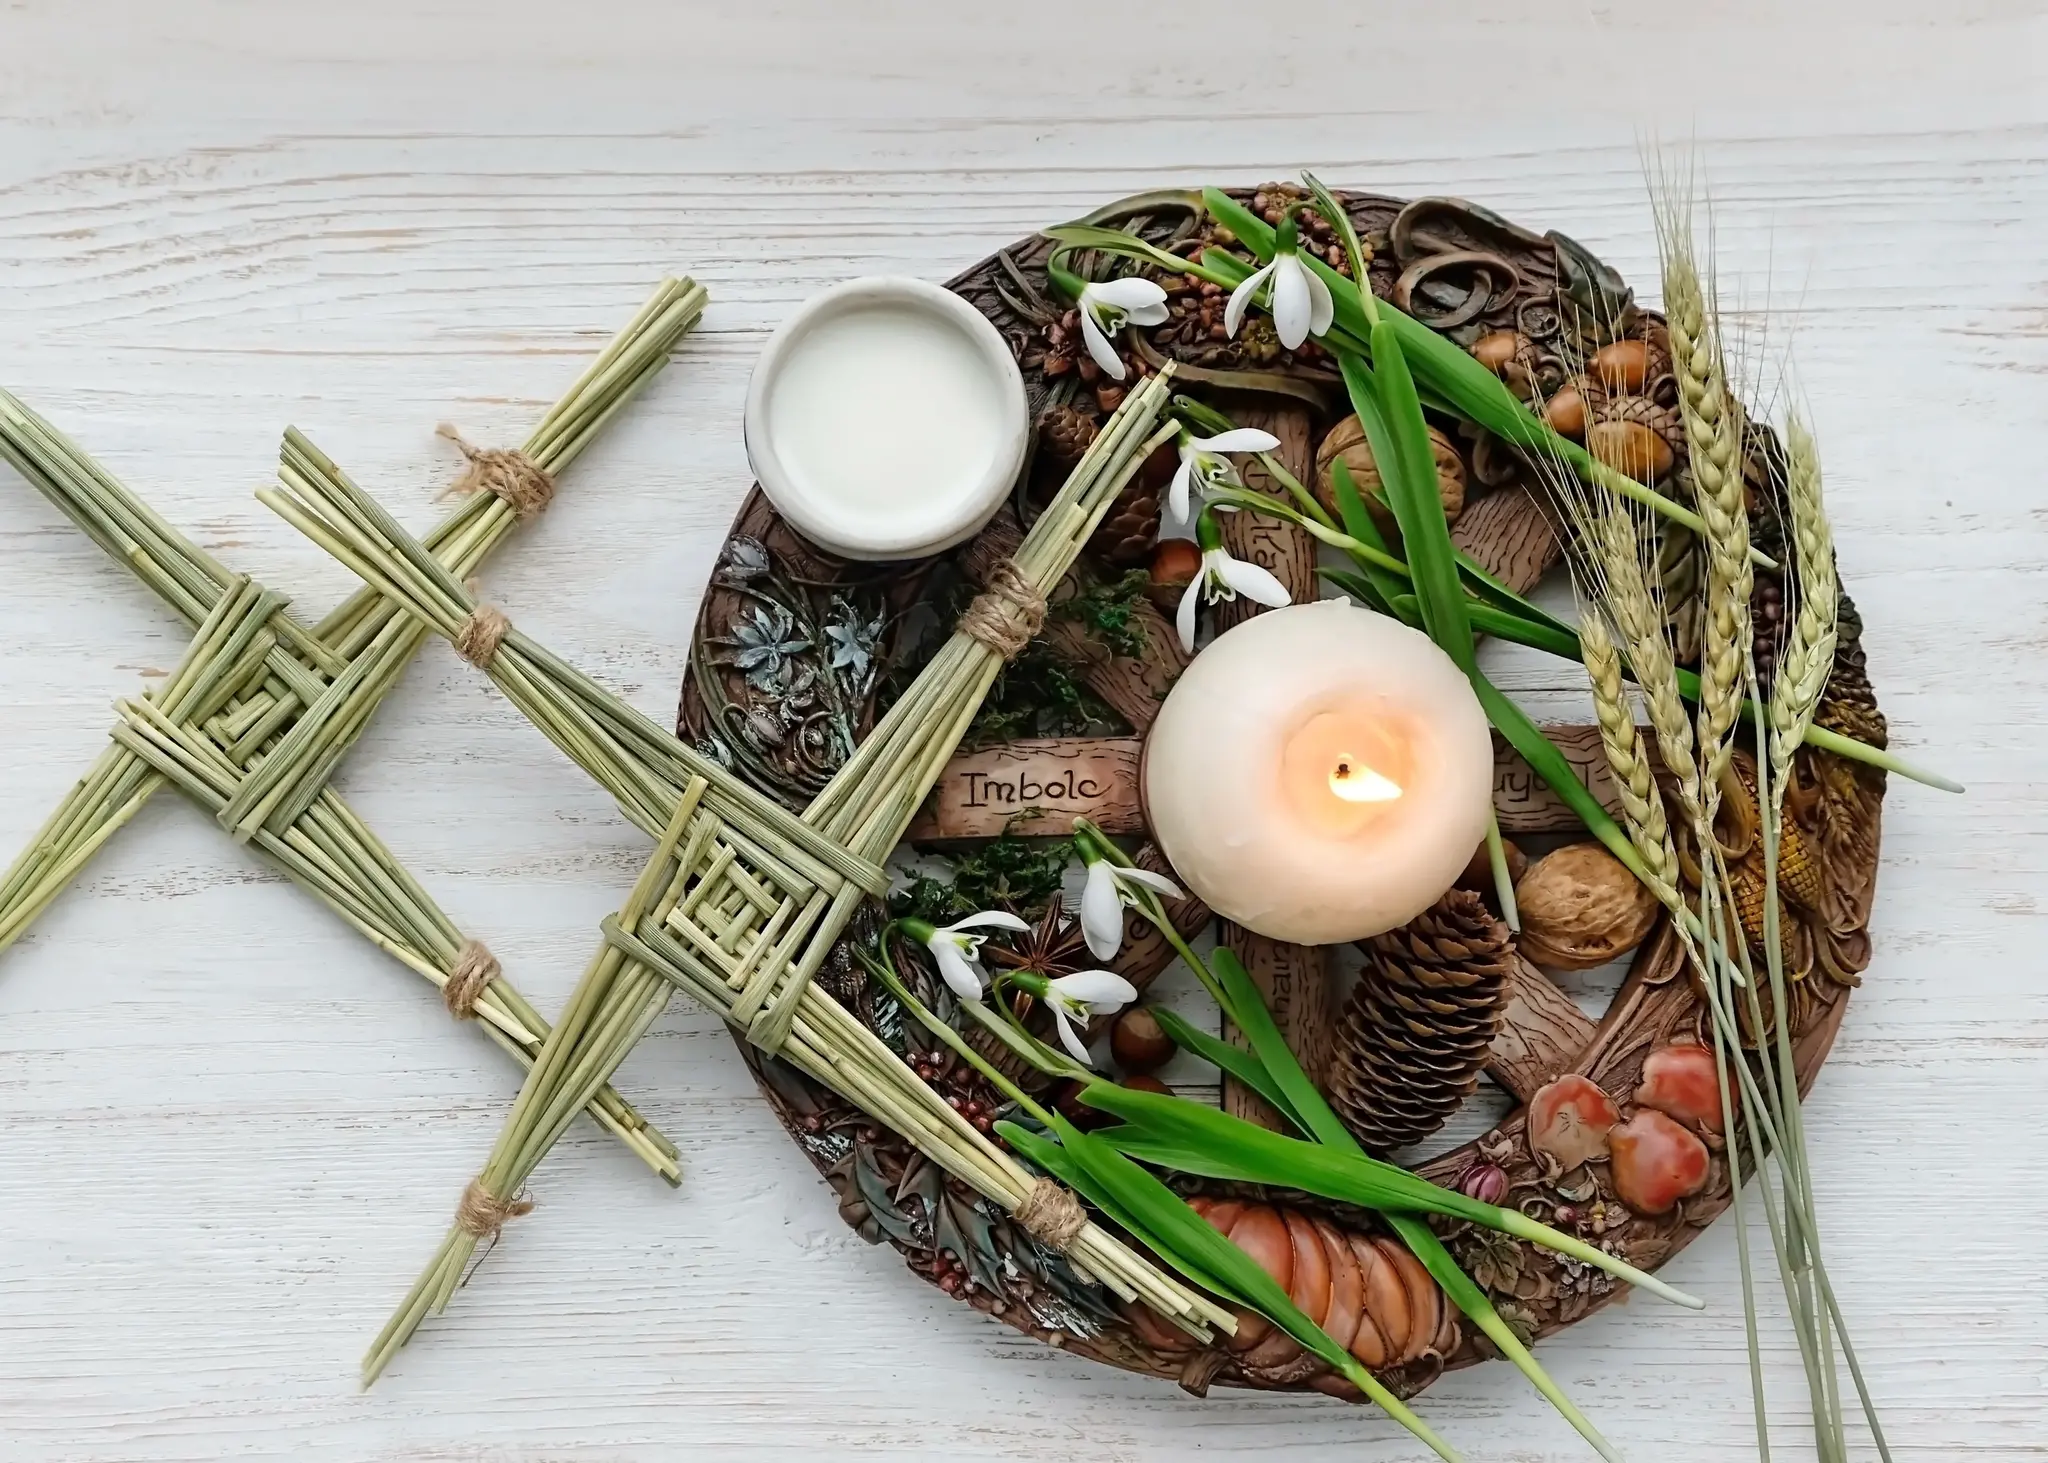 Imbolc: Move Over Winter, Spring is on its Way!